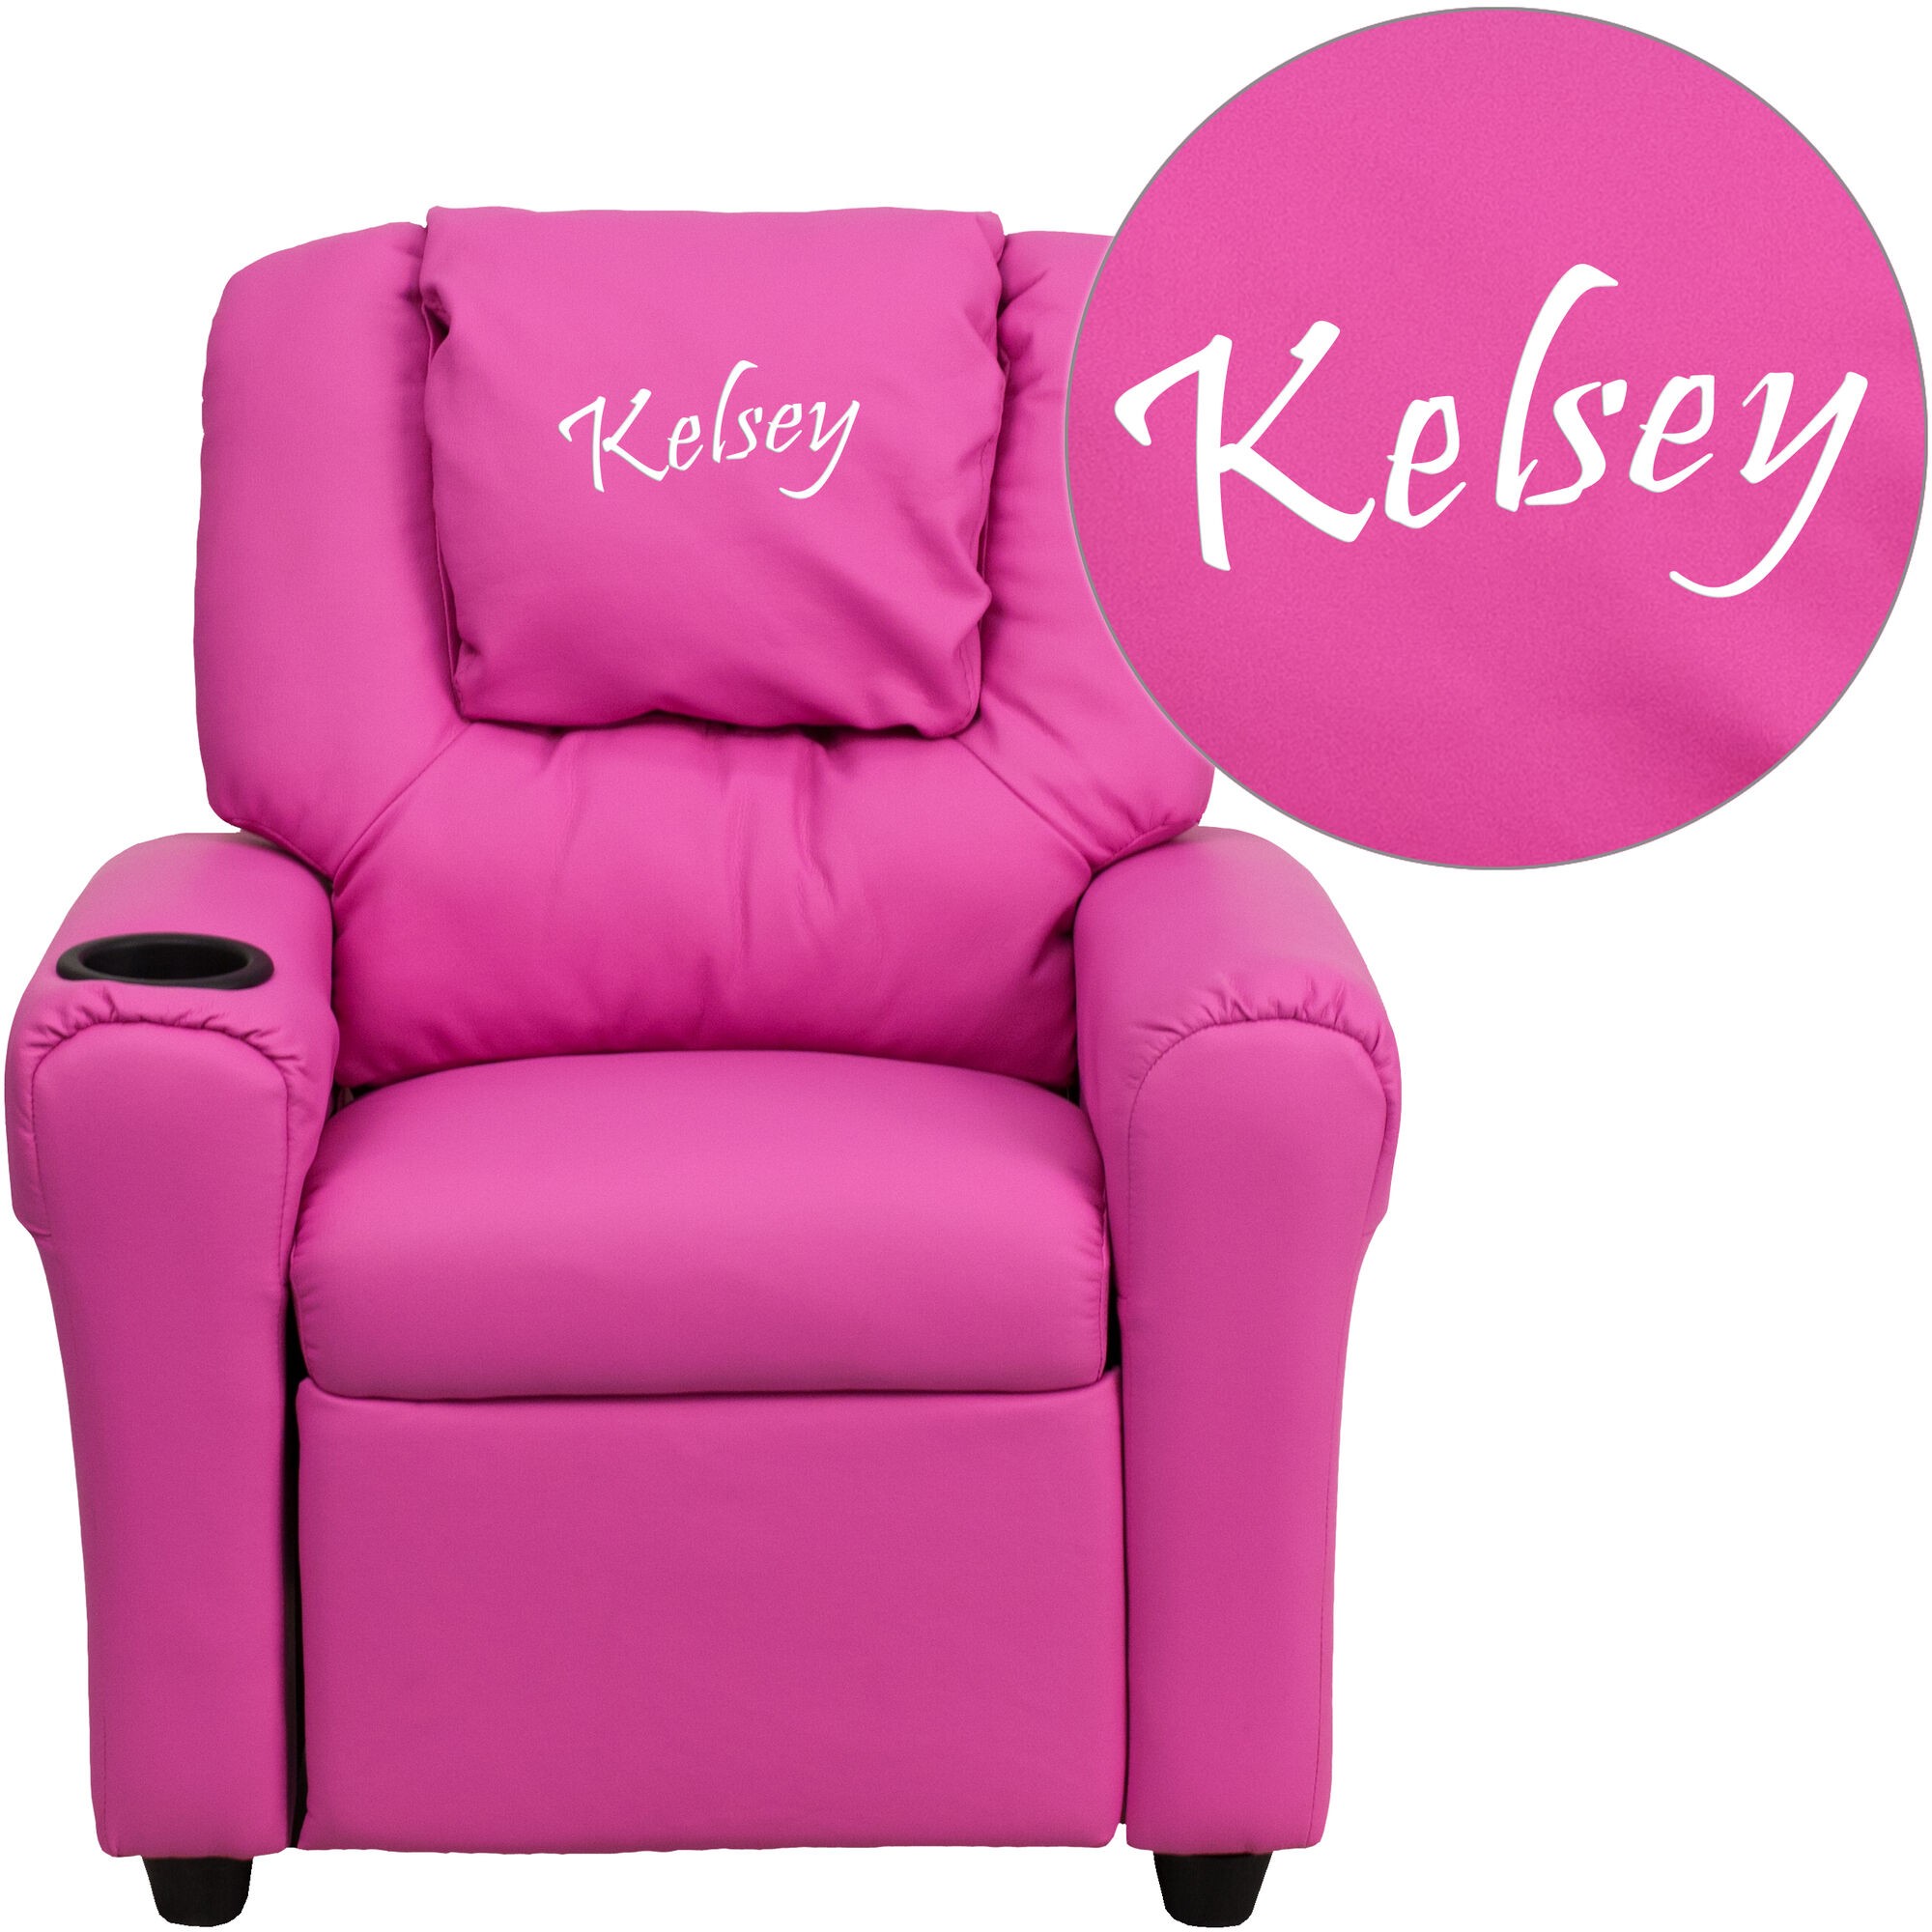 Personalized kids contemporary recliner kids chairs